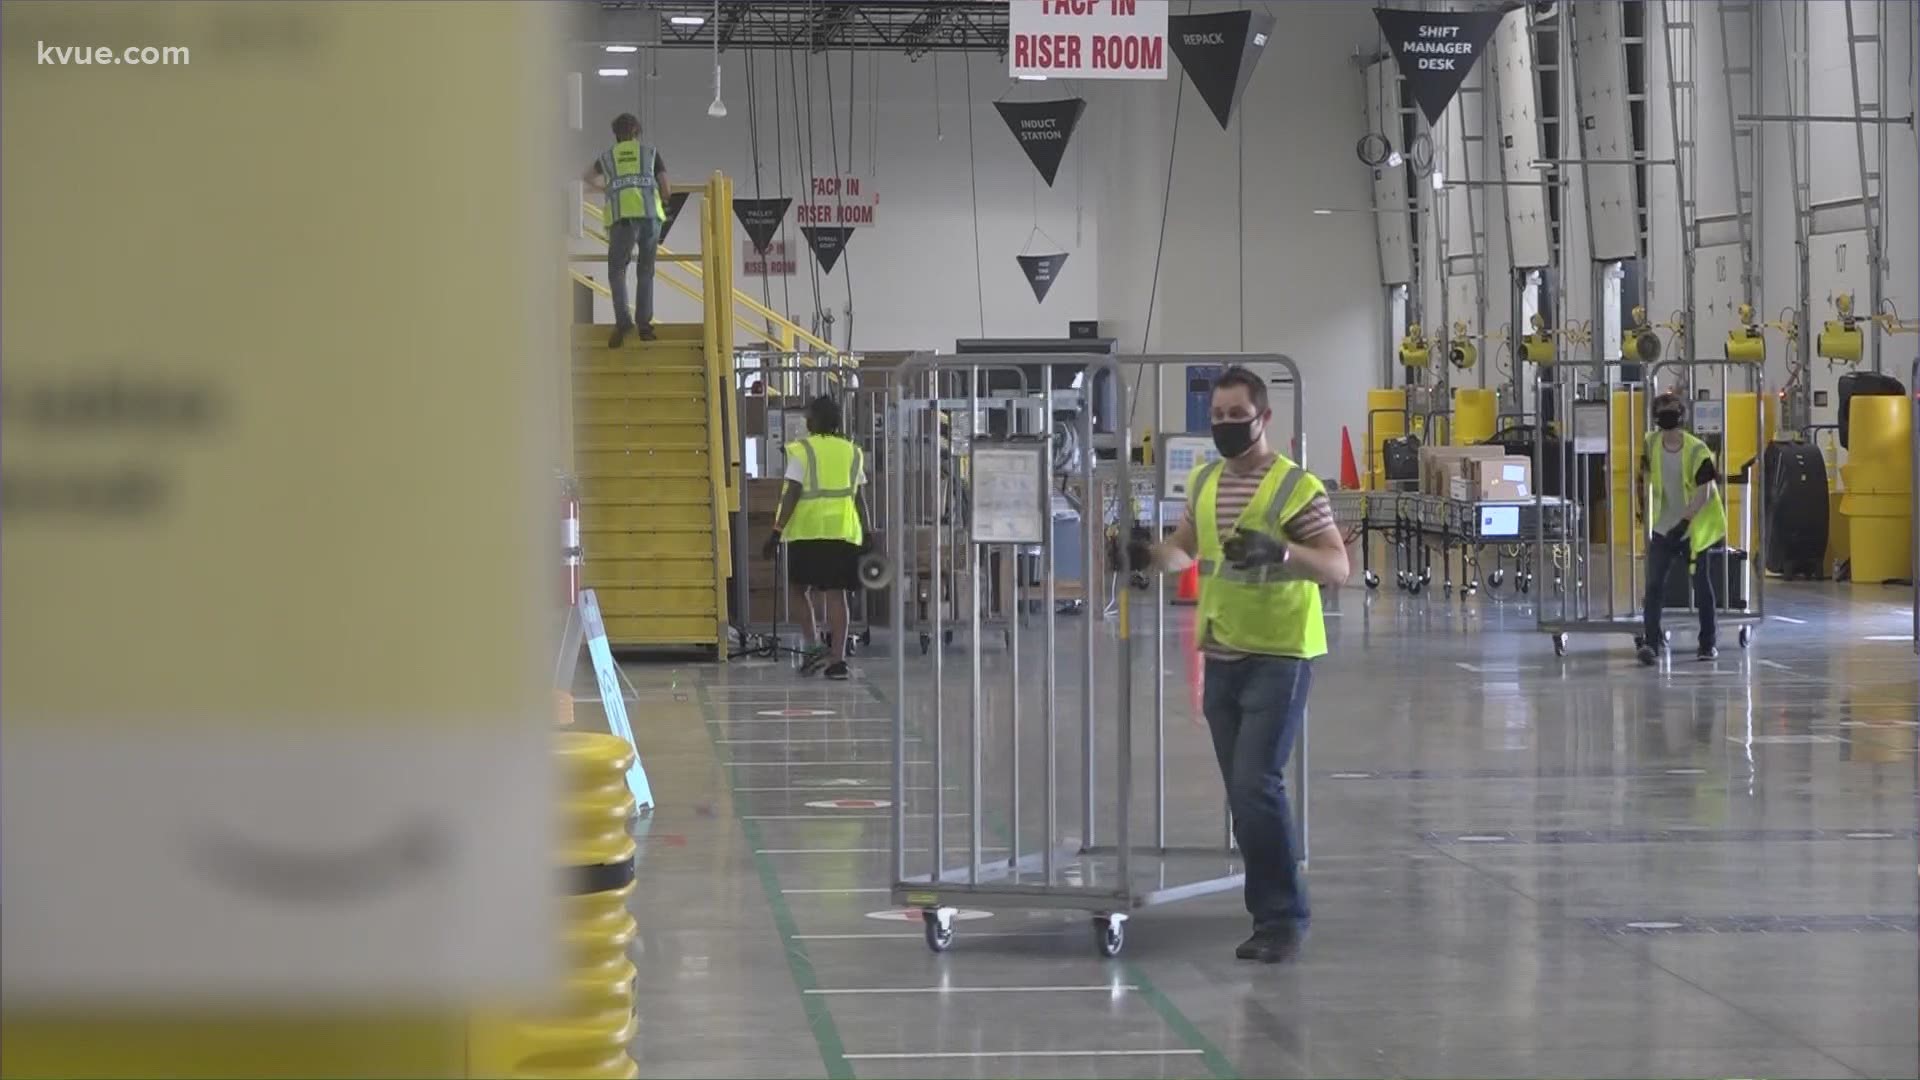 Amazon facilities have been popping up across Central Texas. The company is looking to hire 1,700 people in the Austin metro area.